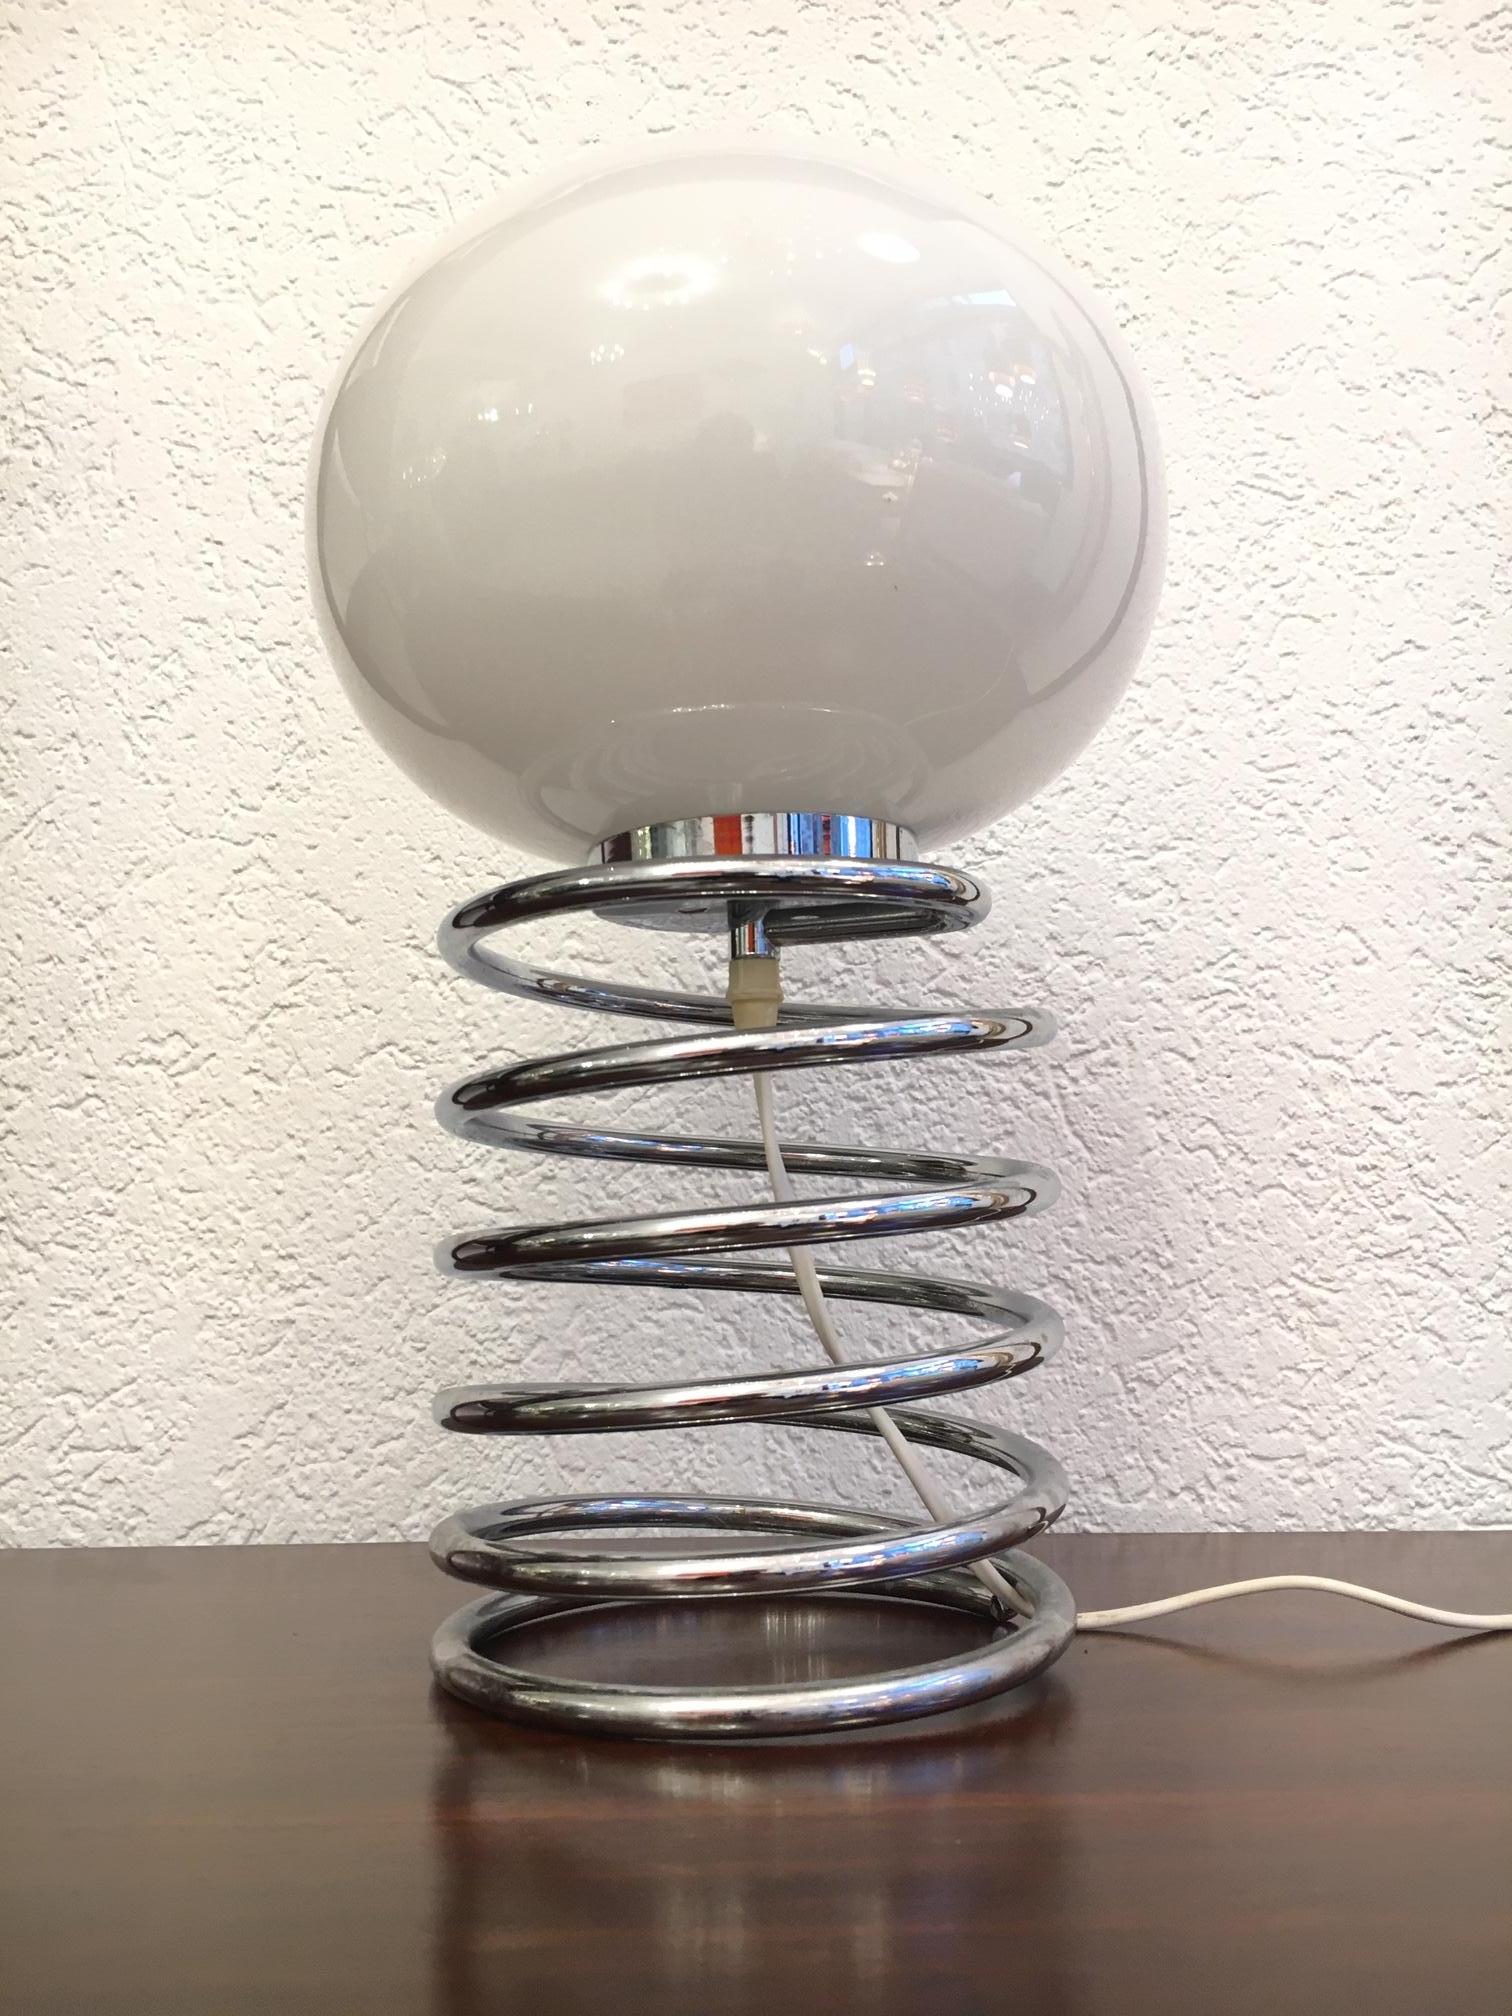 Ingo Maurer table lamp, larger model, produced by Design M, Germany, circa 1965
Chromed steel base, glass shade
Very good condition.